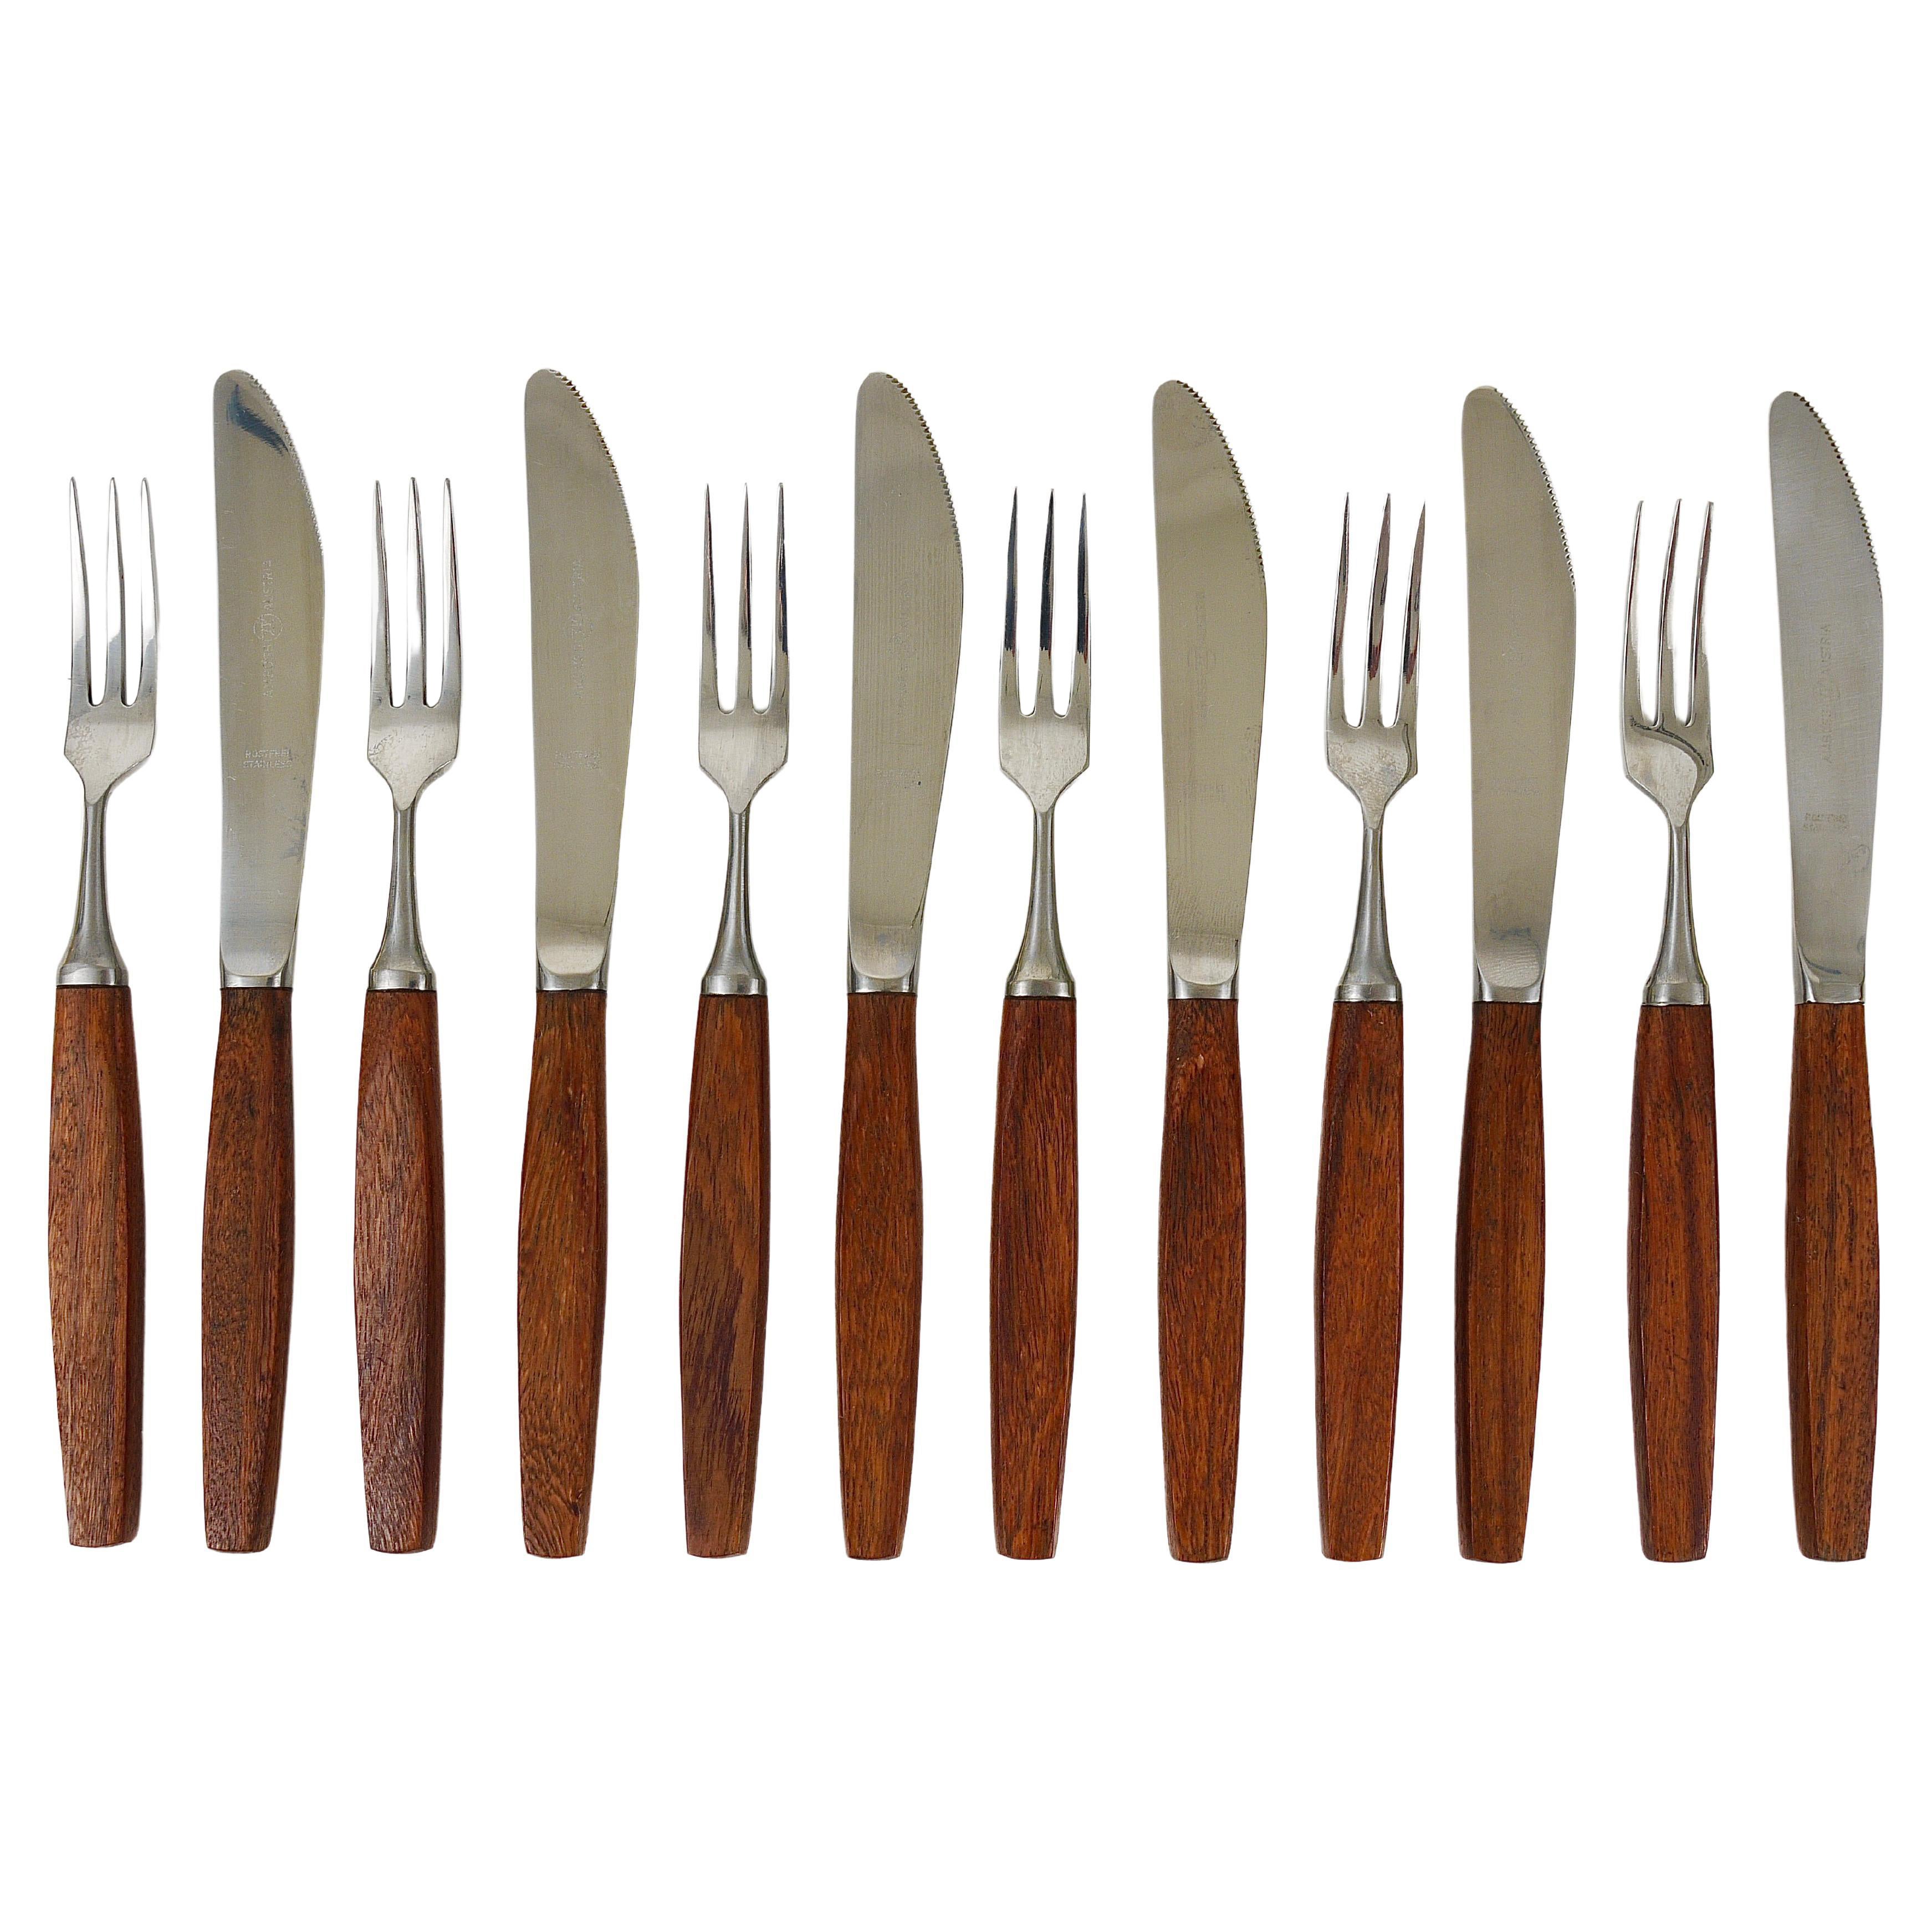 Boxed Amboss Mid-Century 6 Knives And 6 Forks, Flatware Cutlery, Austria, 1950s